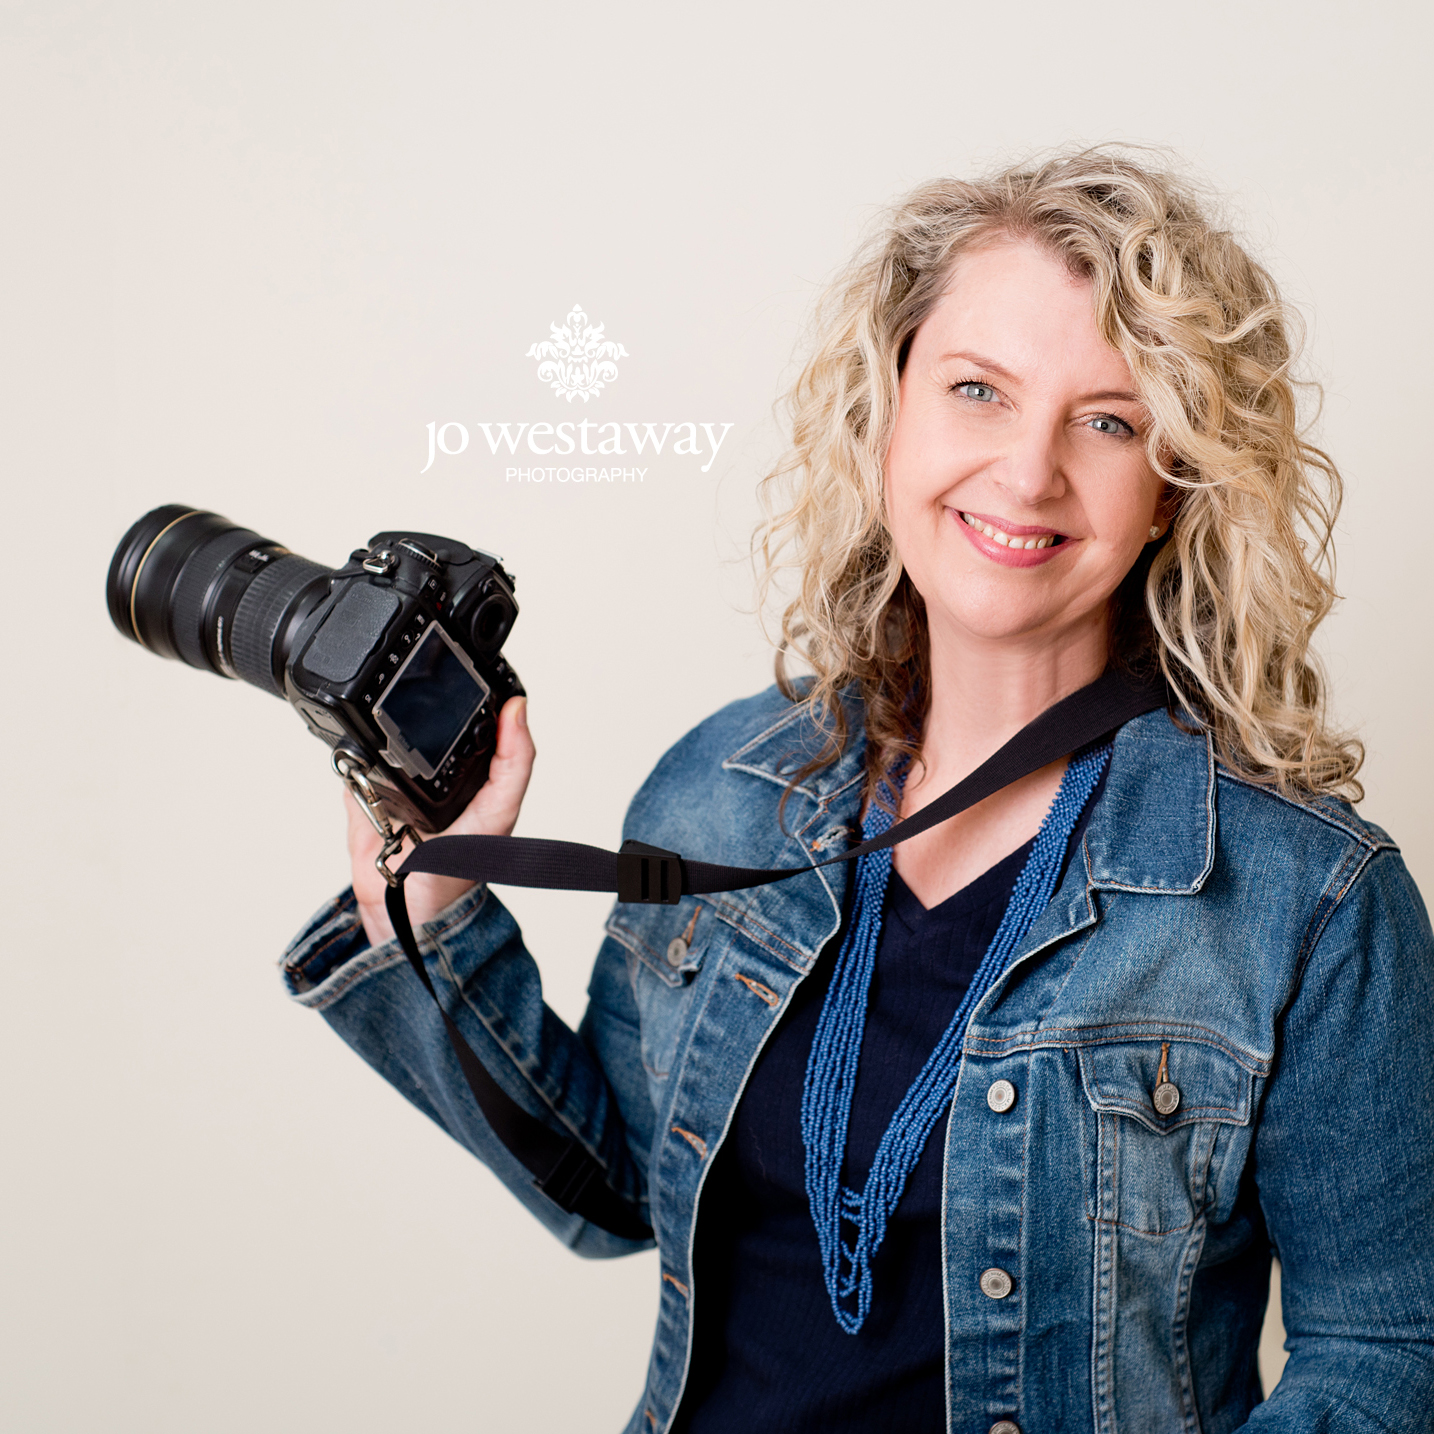 Jo Westaway - photography studio specialising in personal branding photographs and story brand social media content images which truly connects with your target market